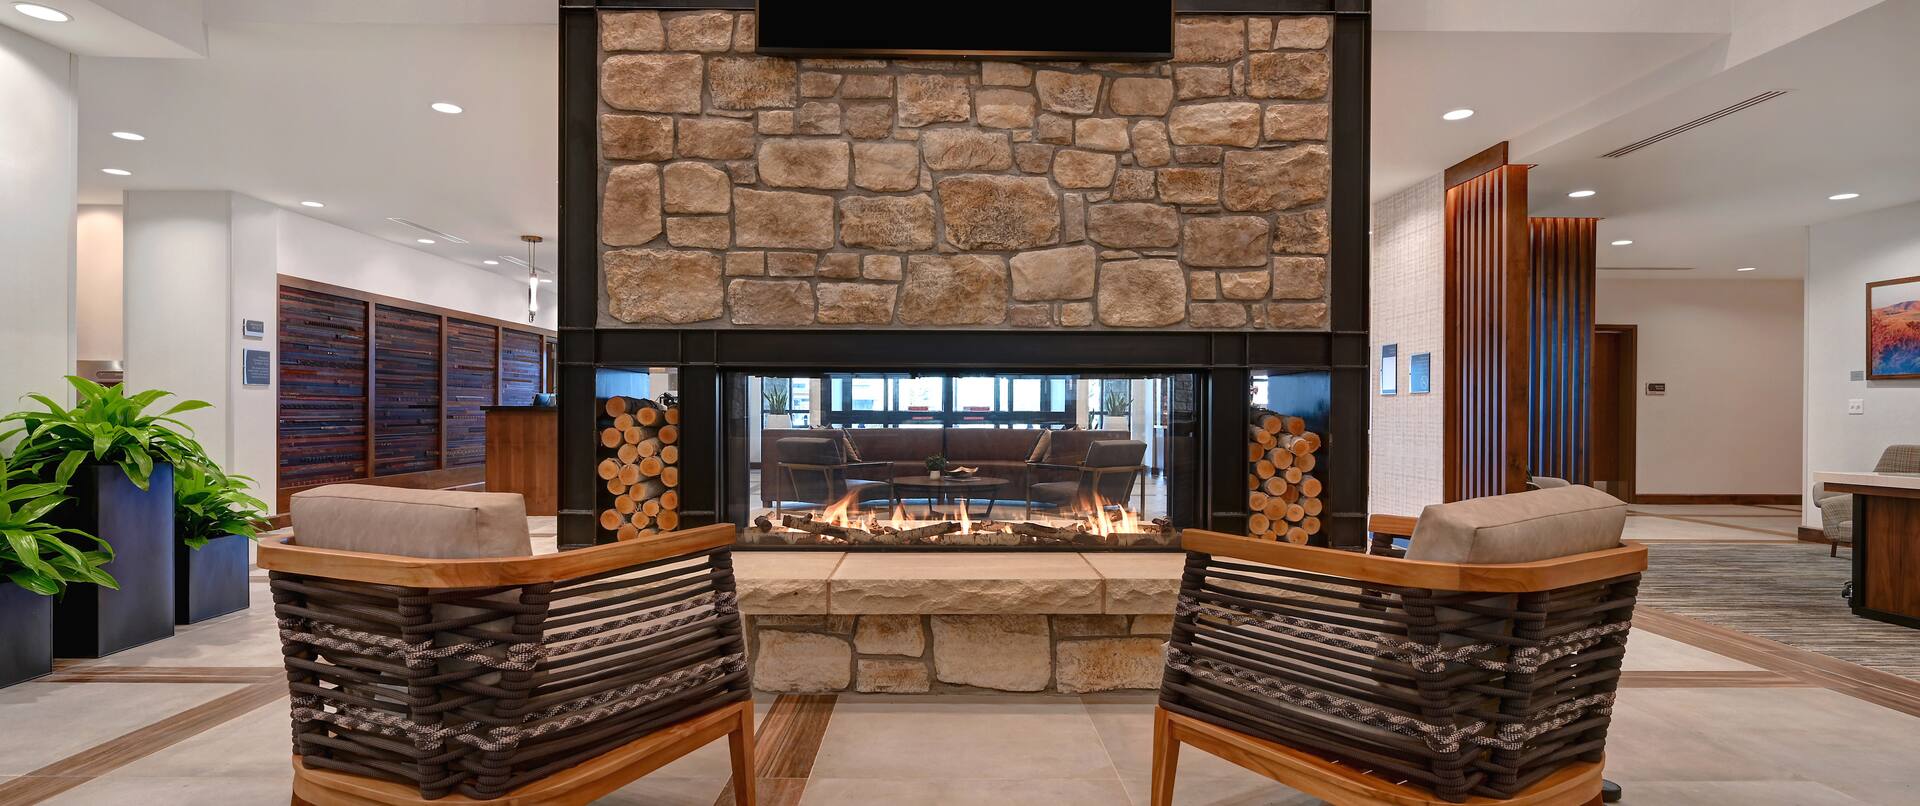 lobby lodge seating area with fireplace and television